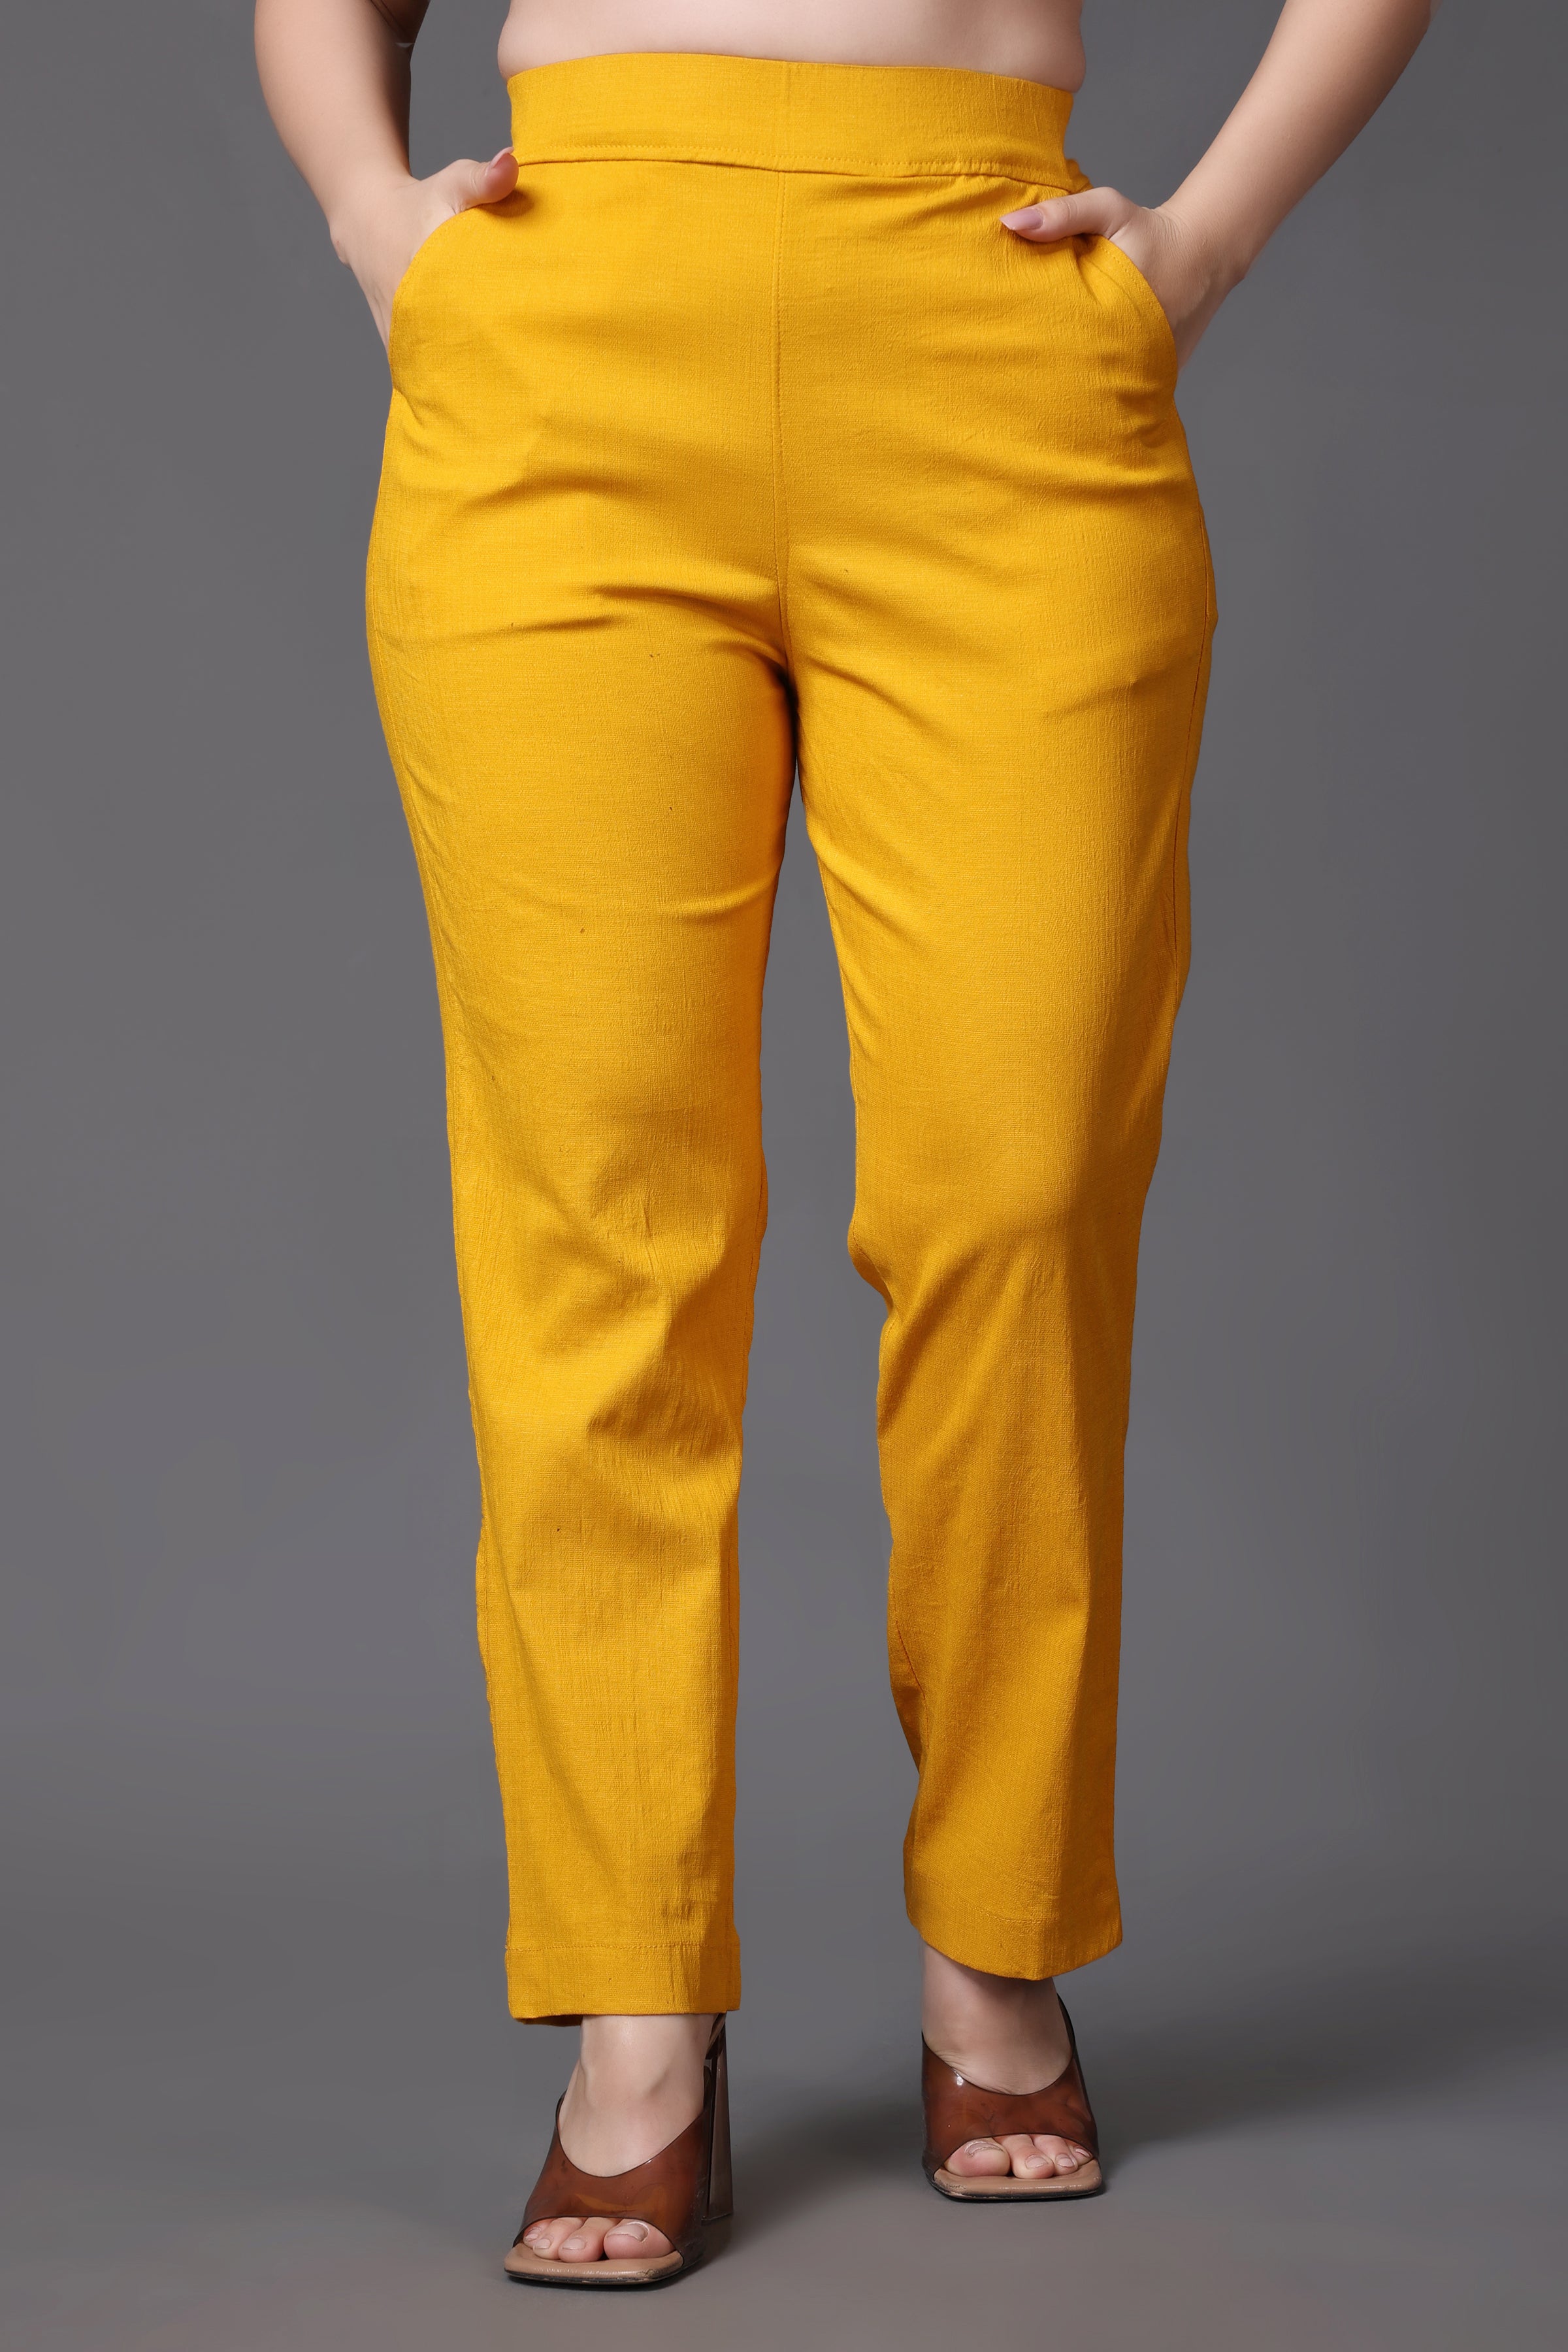 Buy Yellow High Waist Flared Jeans For Women Online - ONLY